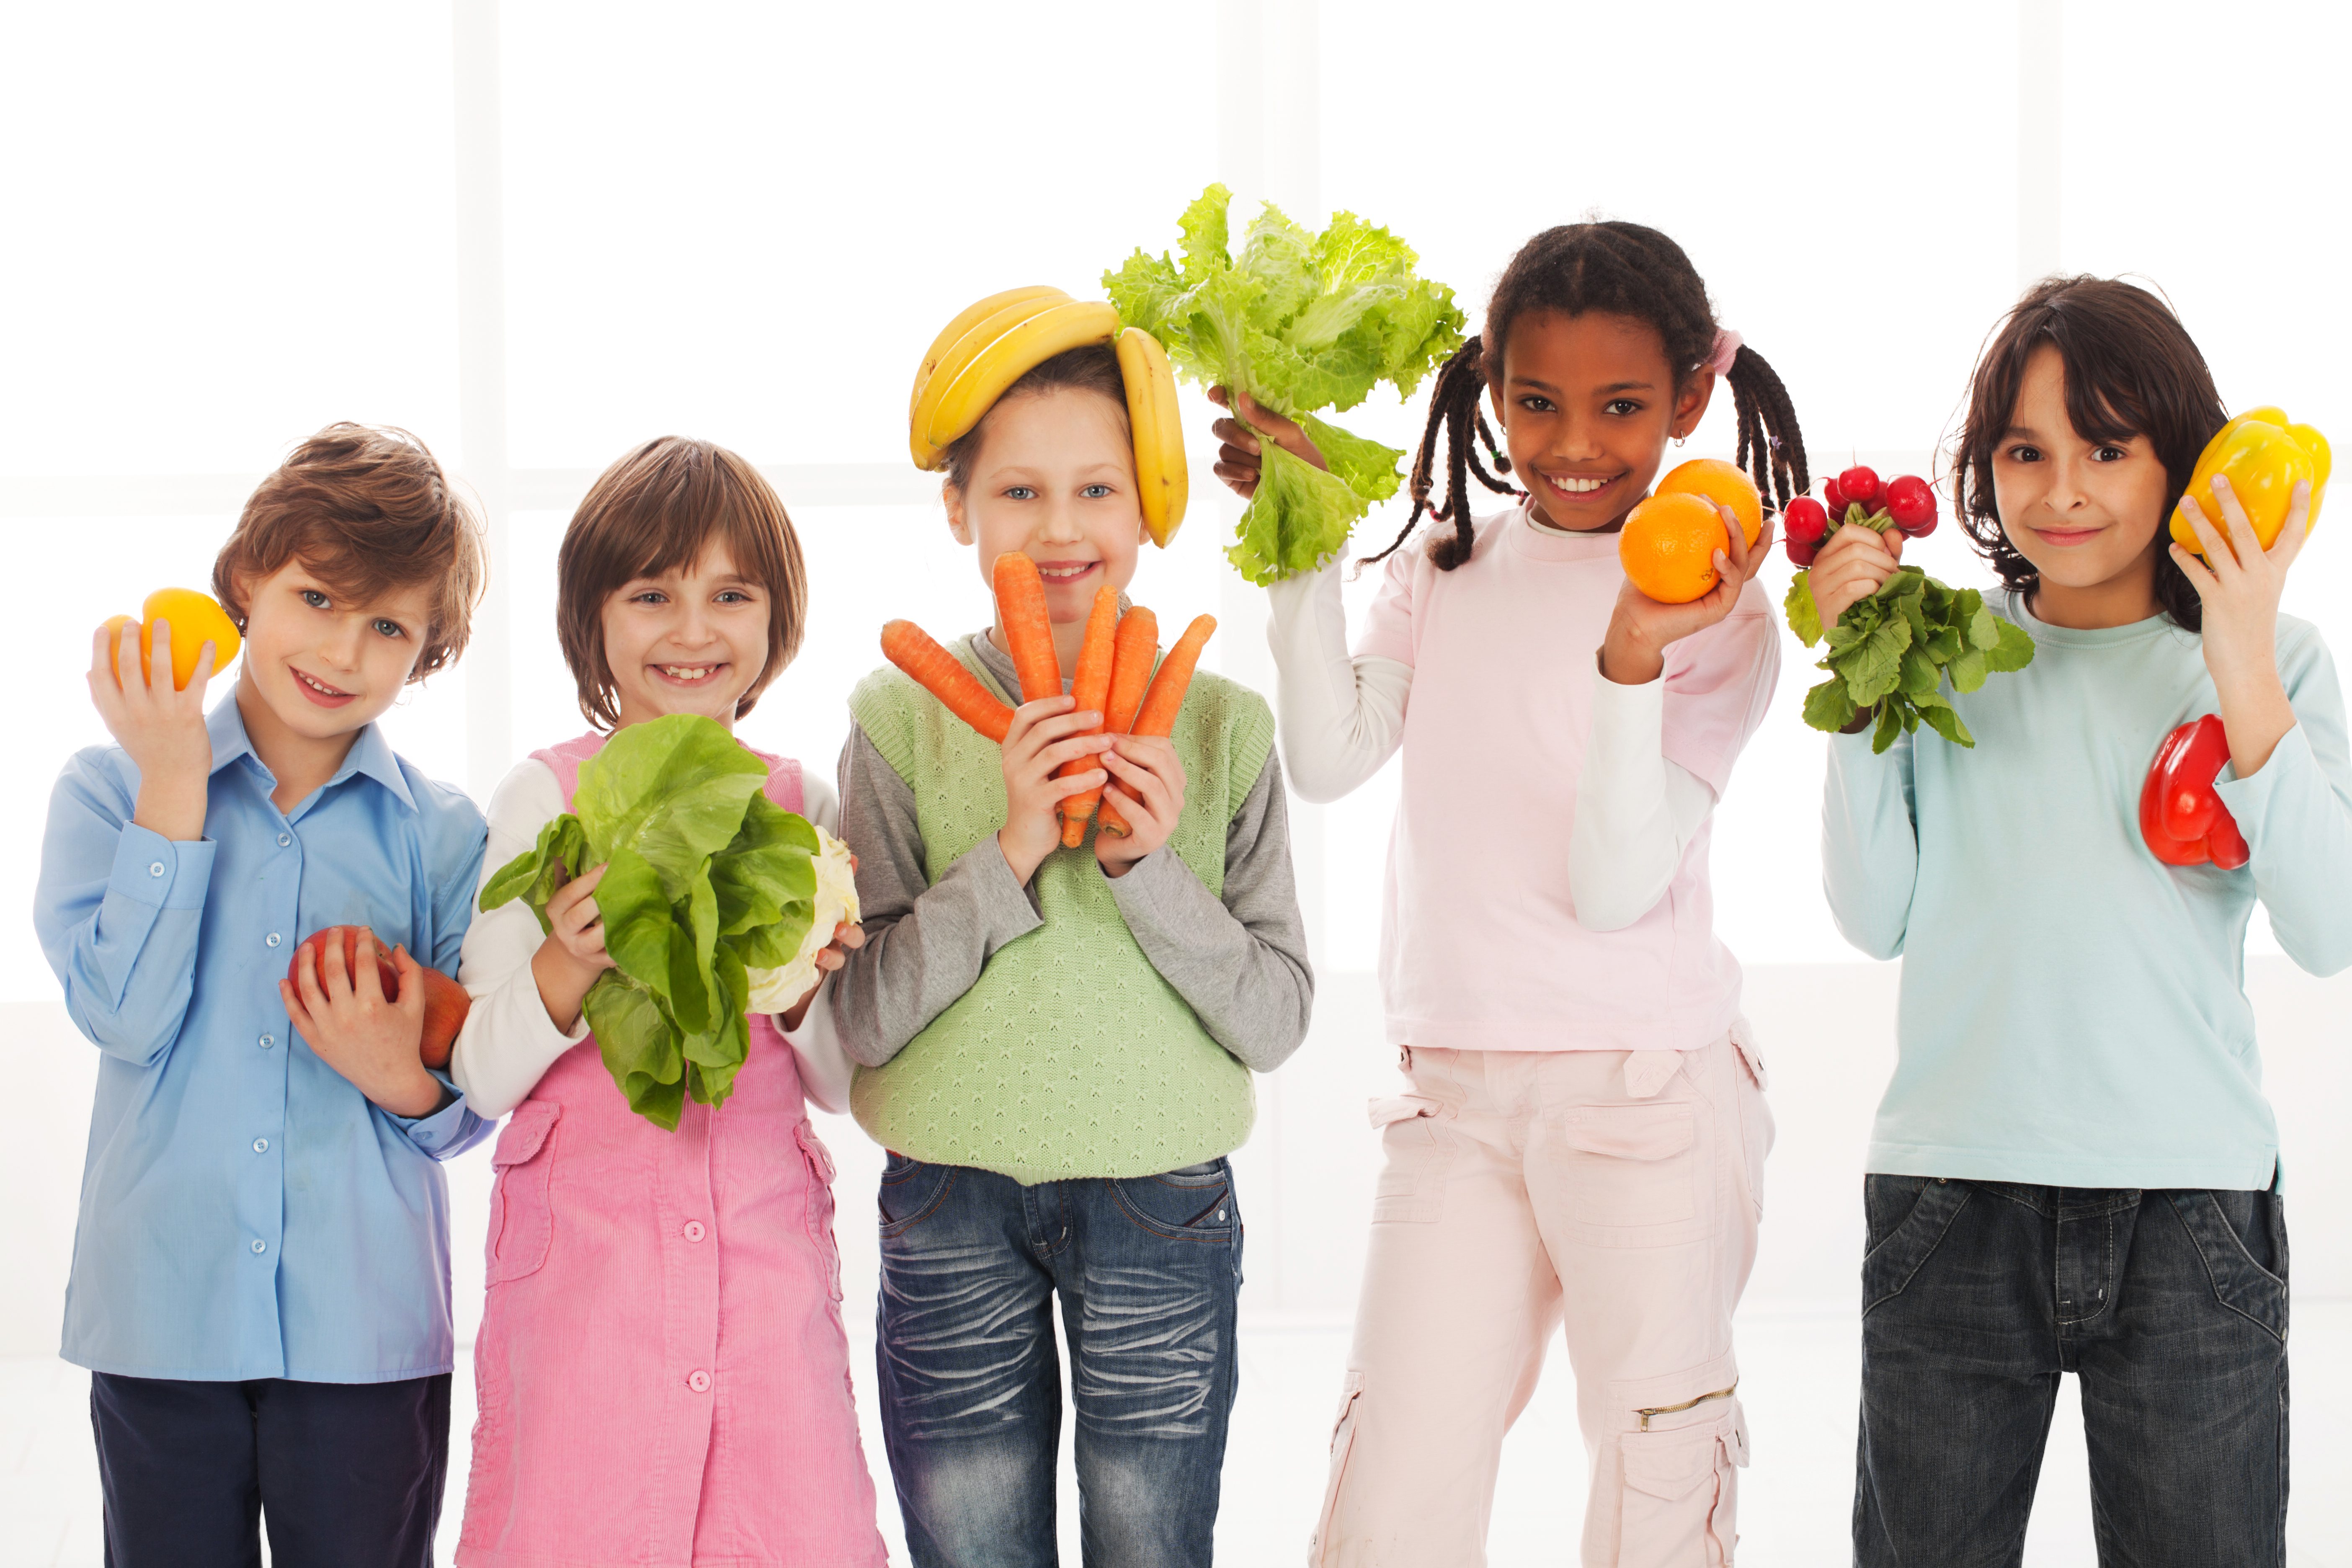 Crediting Food Groups in Child Nutrition Programs